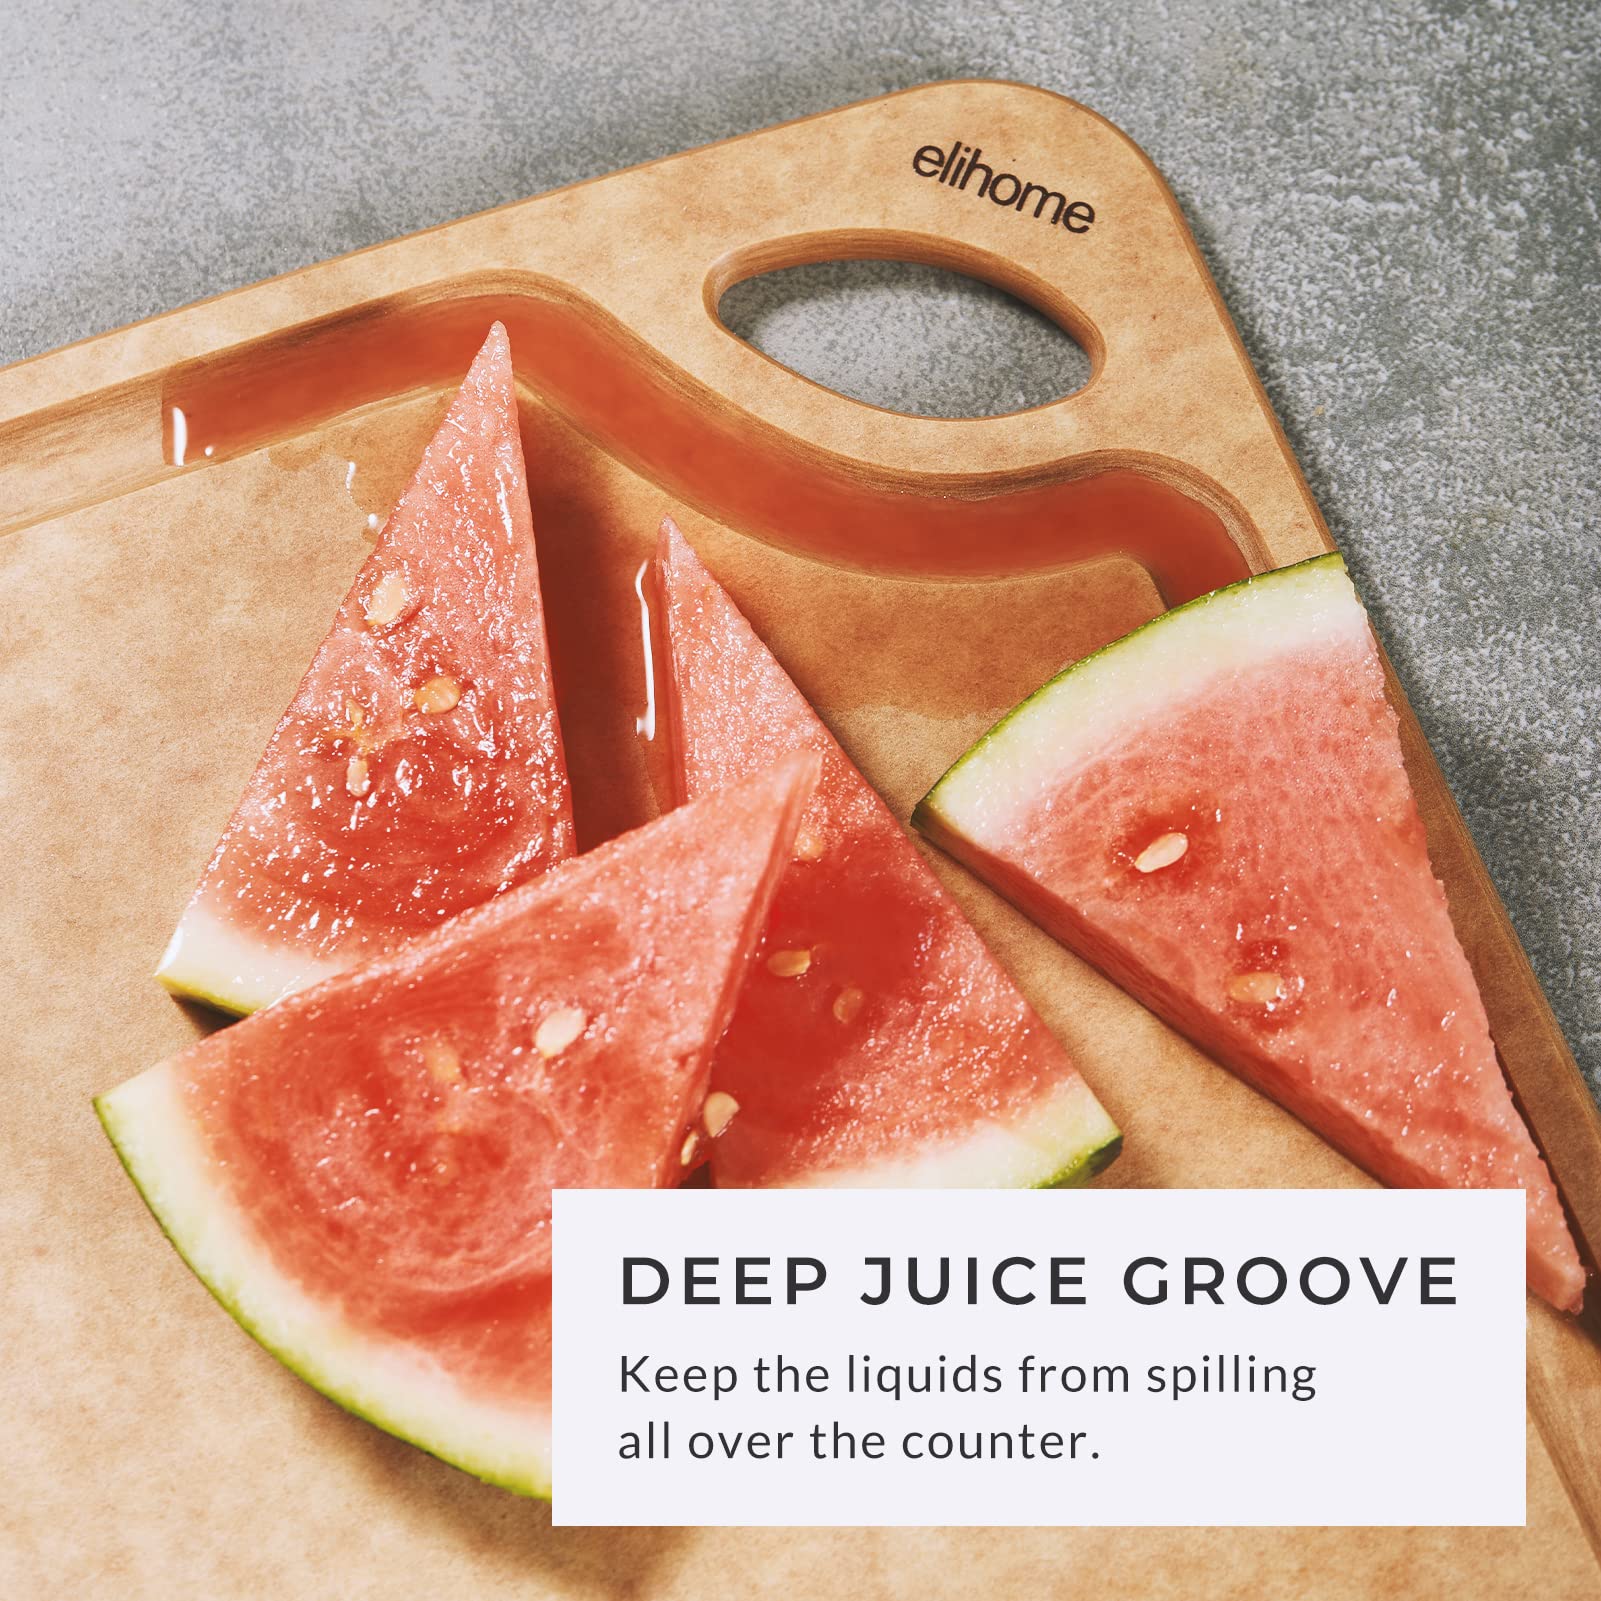 Elihome Classic Series MEDIUM Cutting Board for Kitchen- Natural Wood Fiber Composite, Dishwasher Safe, Eco-Friendly, Juice Grooves, Non-Porous, Reversible, BPA Free, Made in USA, 13"x 10"x 1/4”